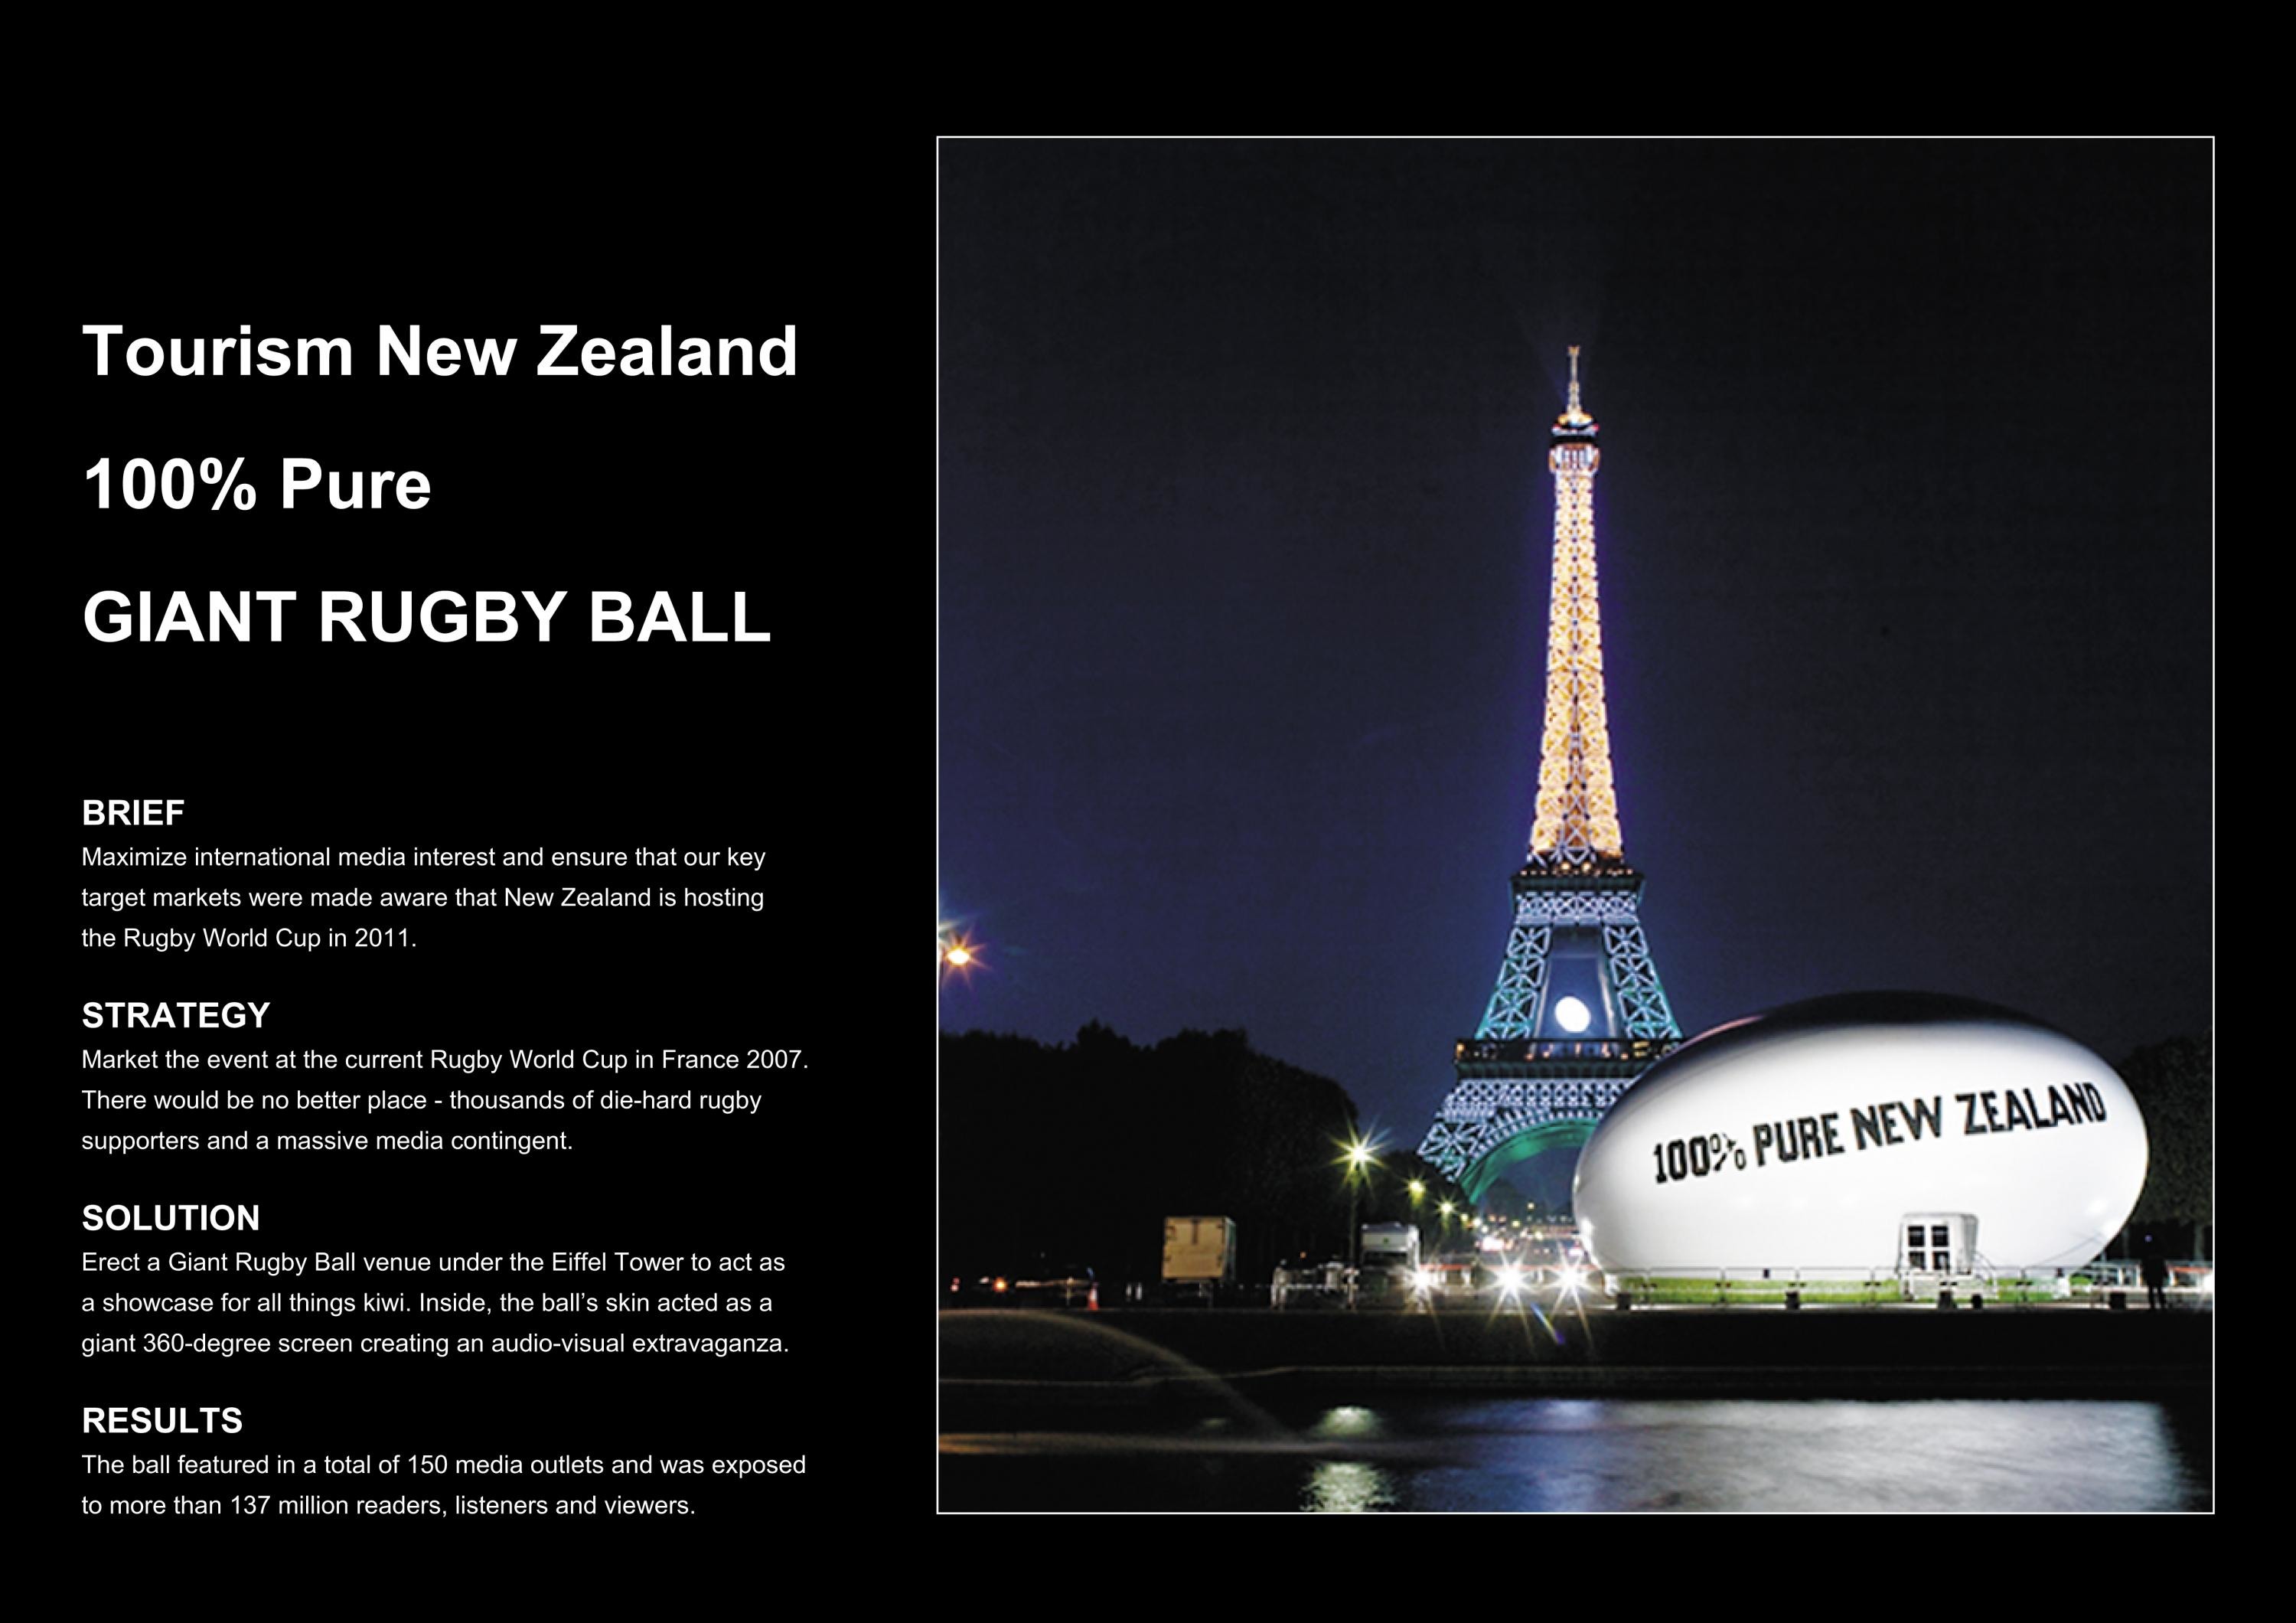 NEW ZEALAND TOURISM - RUGBY WORLD CUP 2011